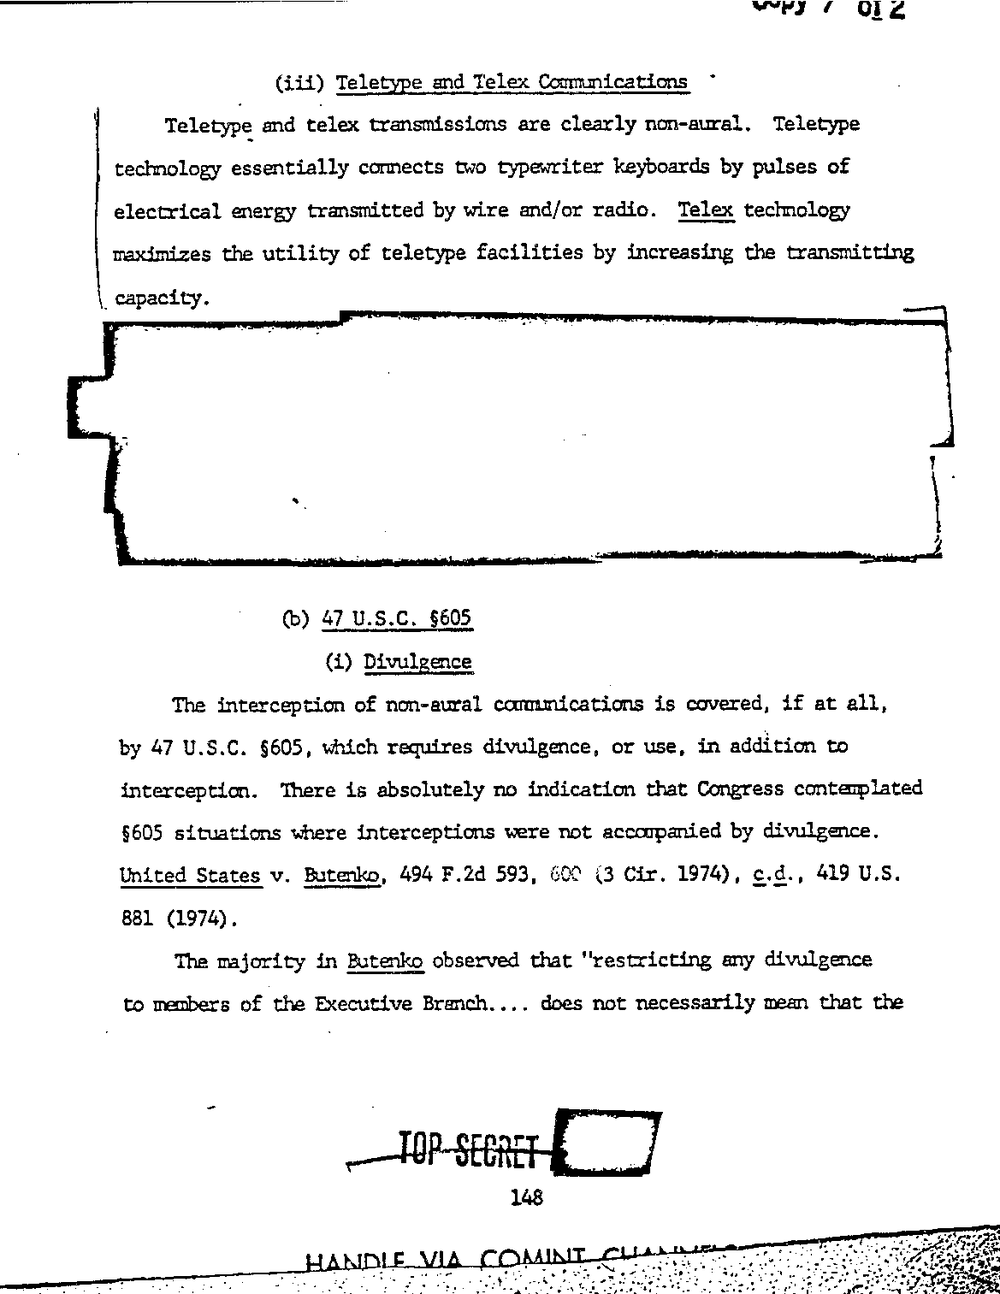 Page 156 from Report on Inquiry Into CIA Related Electronic Surveillance Activities